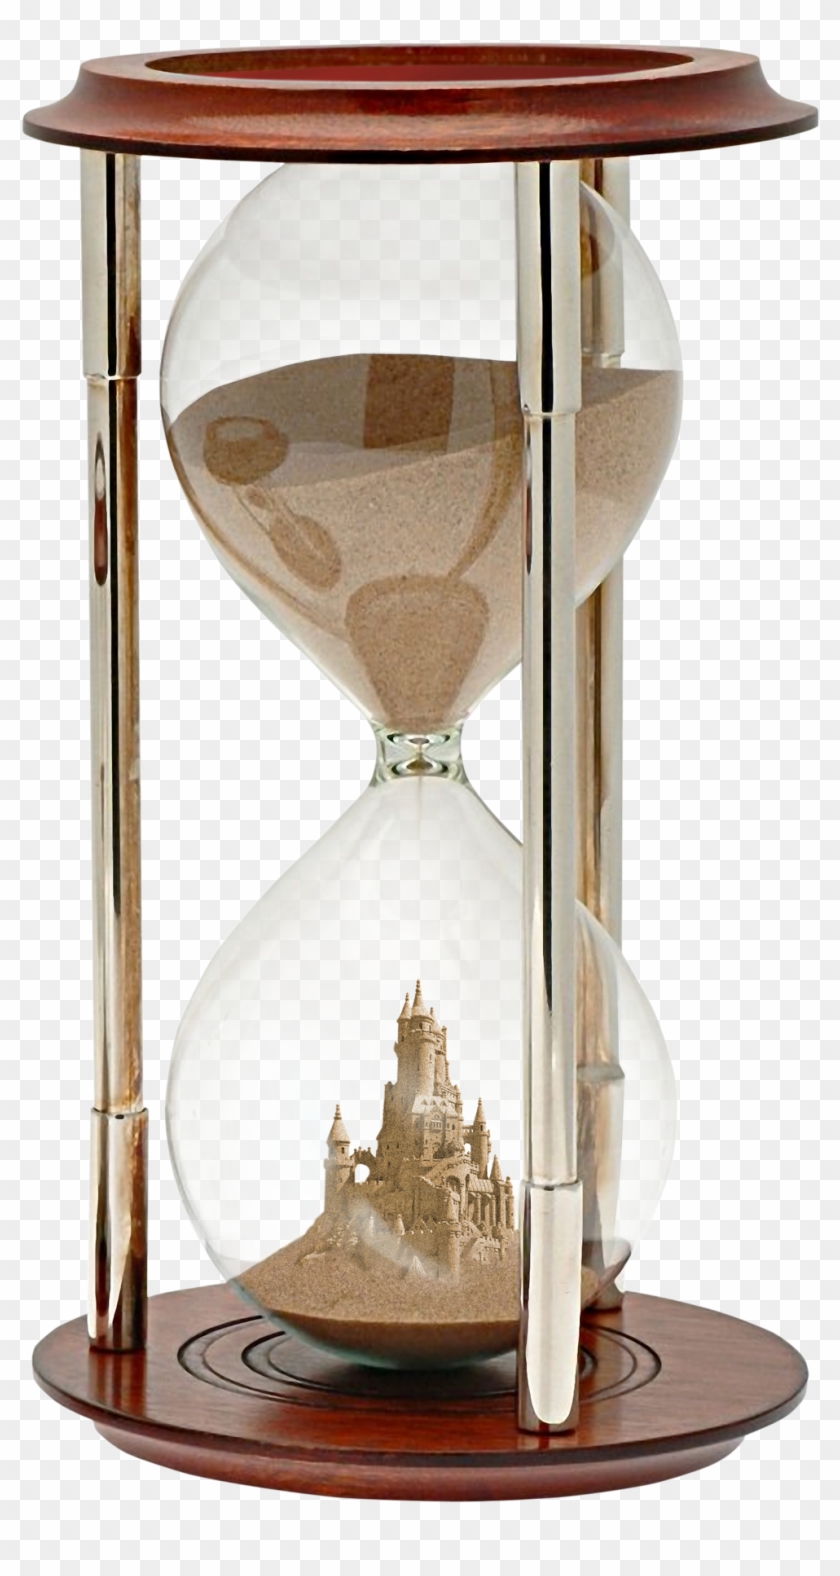 Hourglass Png Transparent Image - Hourglass Png Clipart #495053